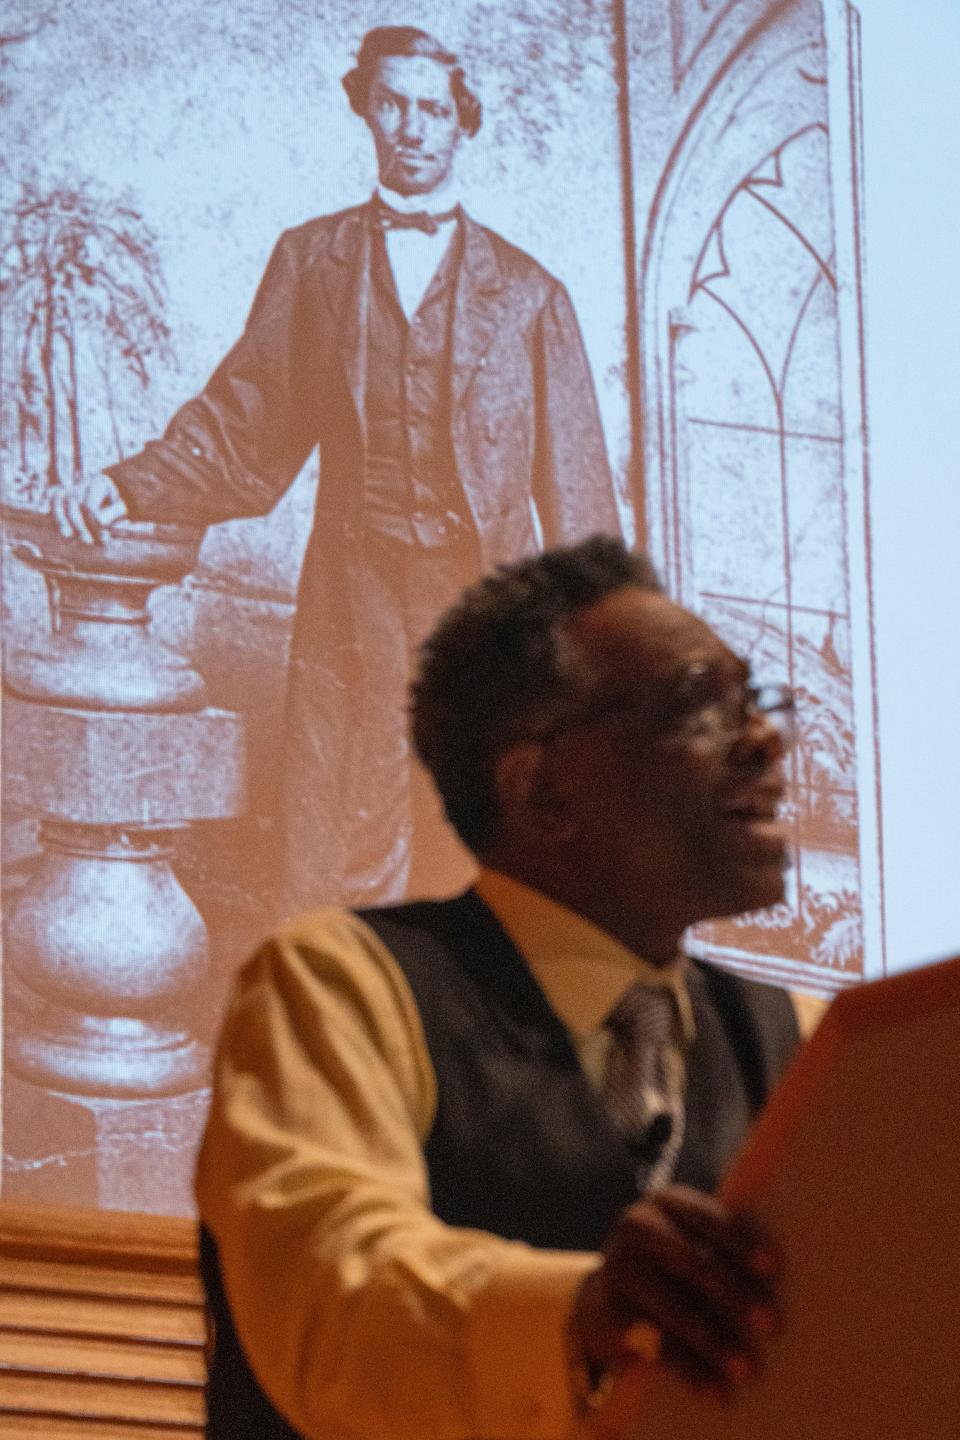 Timothy Lake, associate professor of English and Black studies, gives a keynote address about the life of John R. Blackburn, the college’s first black student, pictured on the screen behind Lake, in Salter Hall at the Fine Arts Center Monday, Feb. 5, 2024, at Wabash College in Crawfordsville, Indiana.